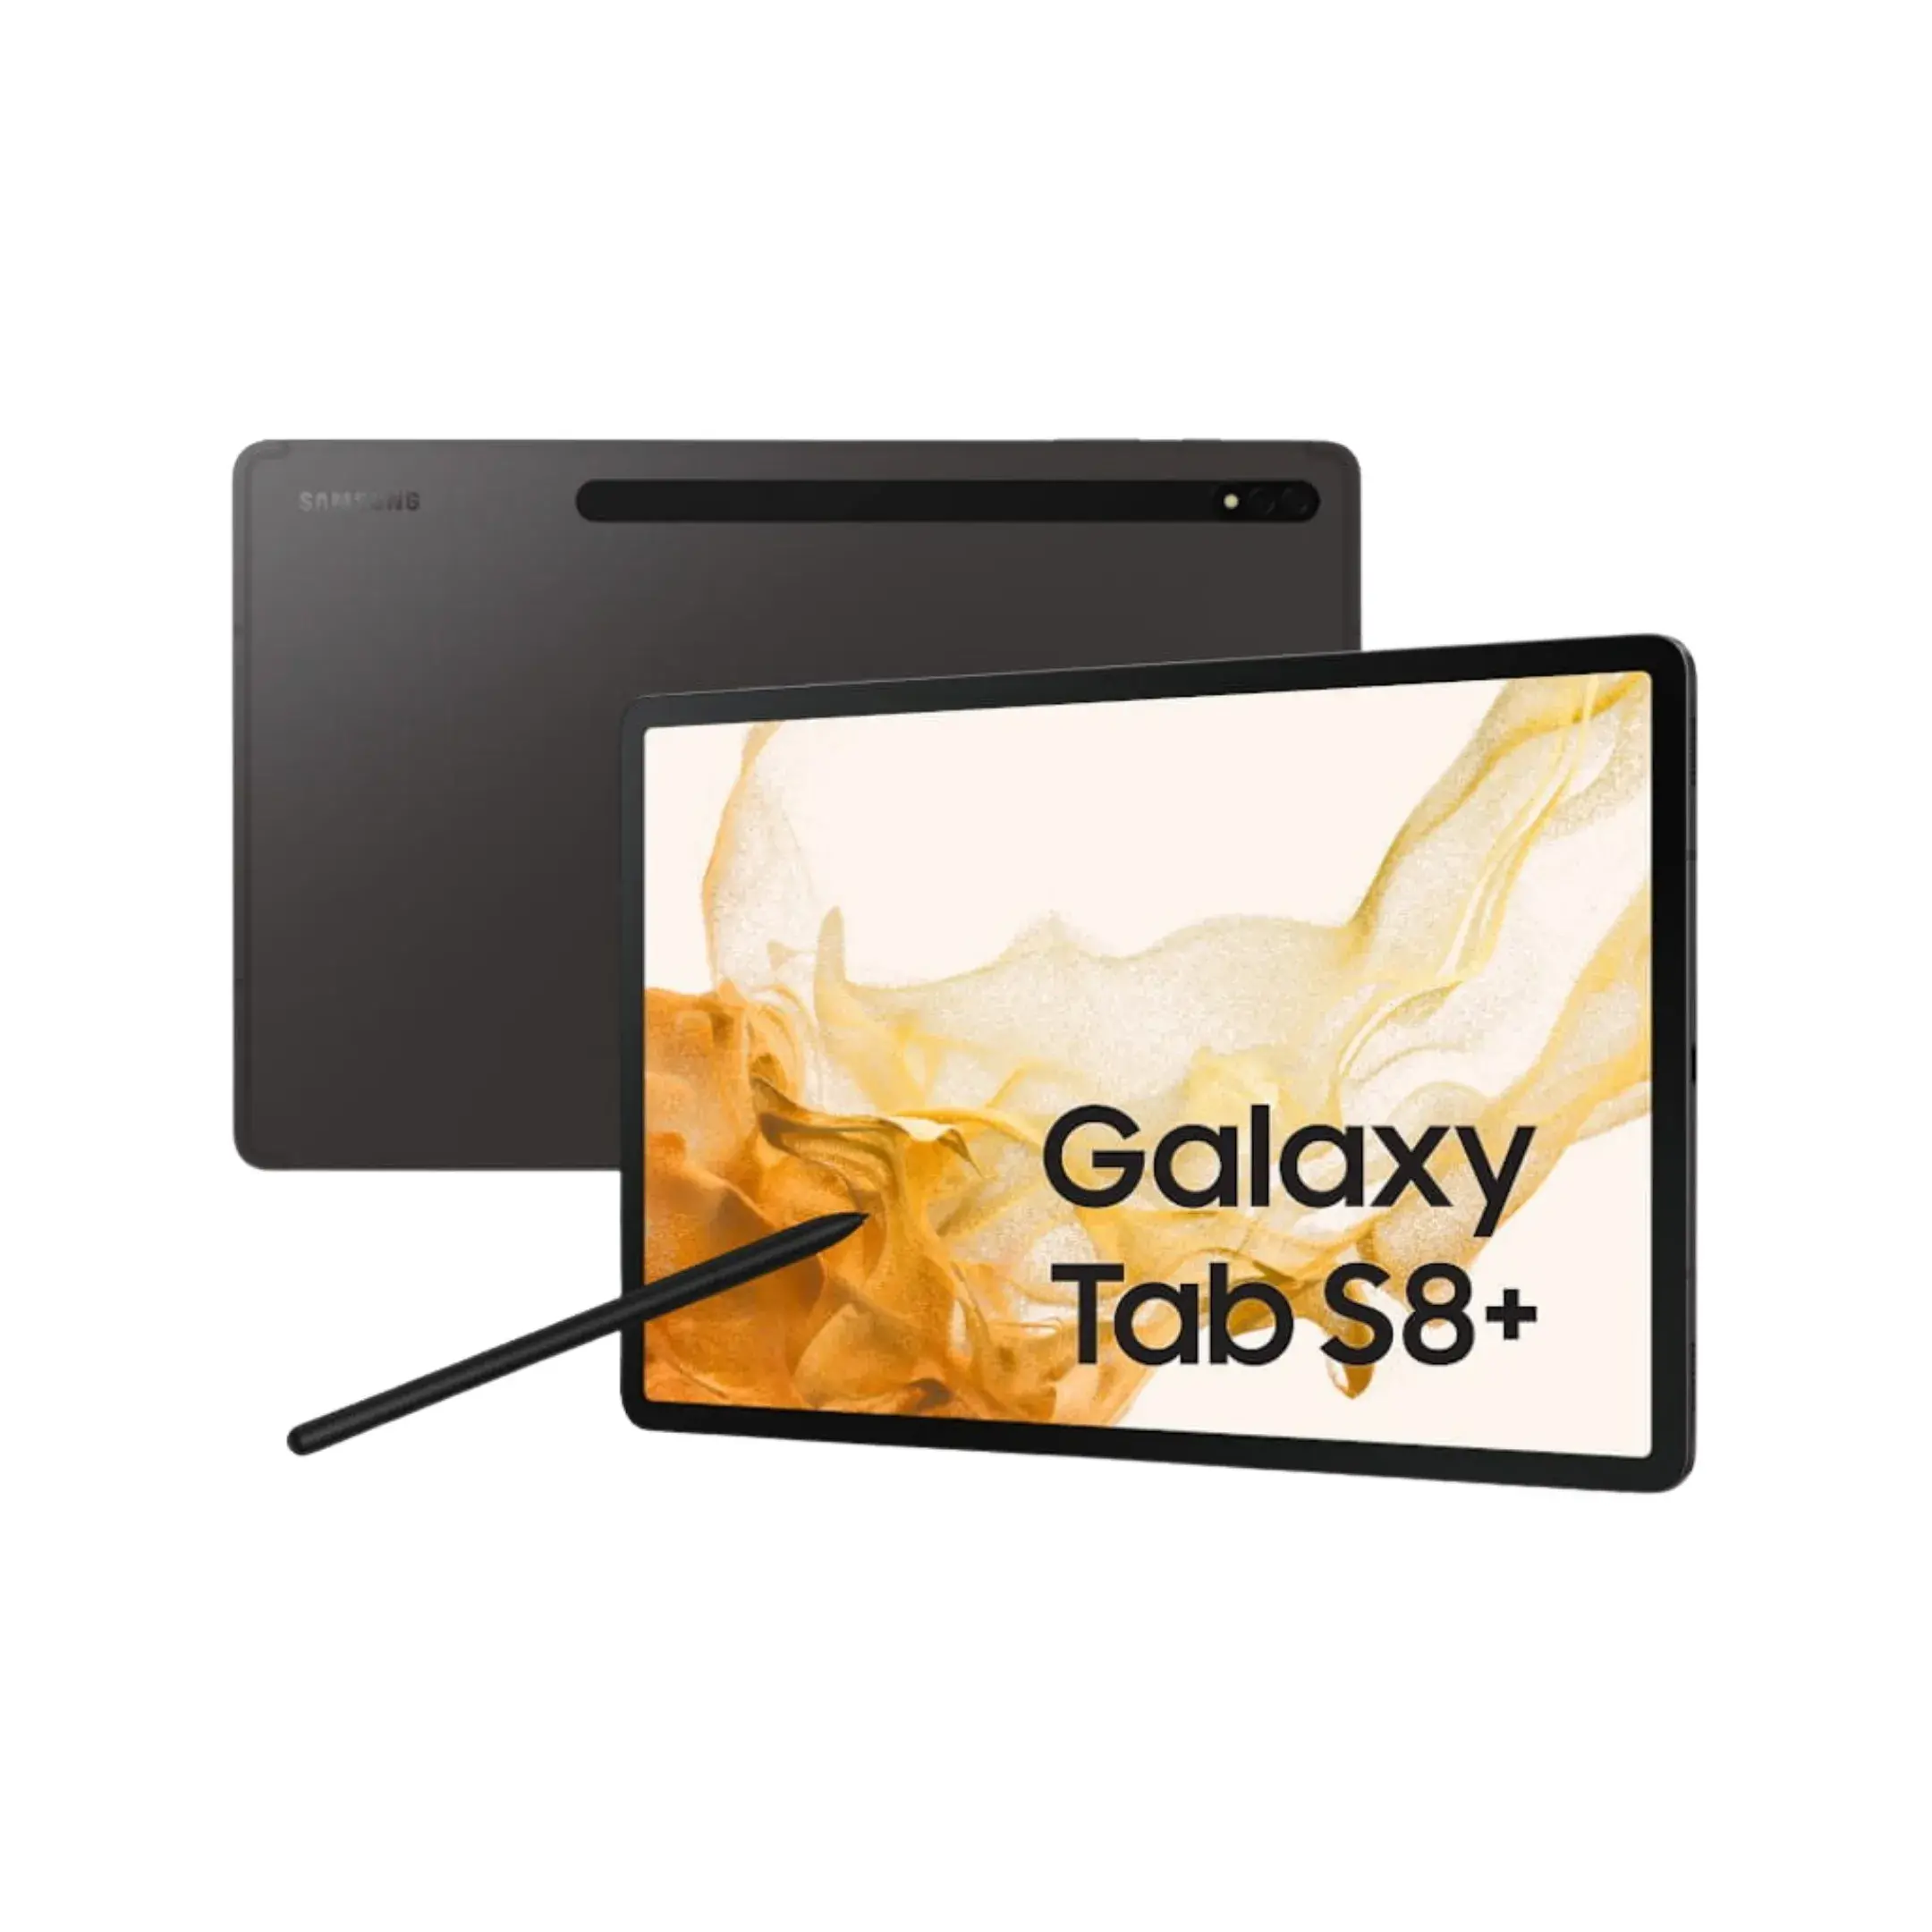 Sell Old Samsung Galaxy Tab S8 Plus Wi-Fi For Cash